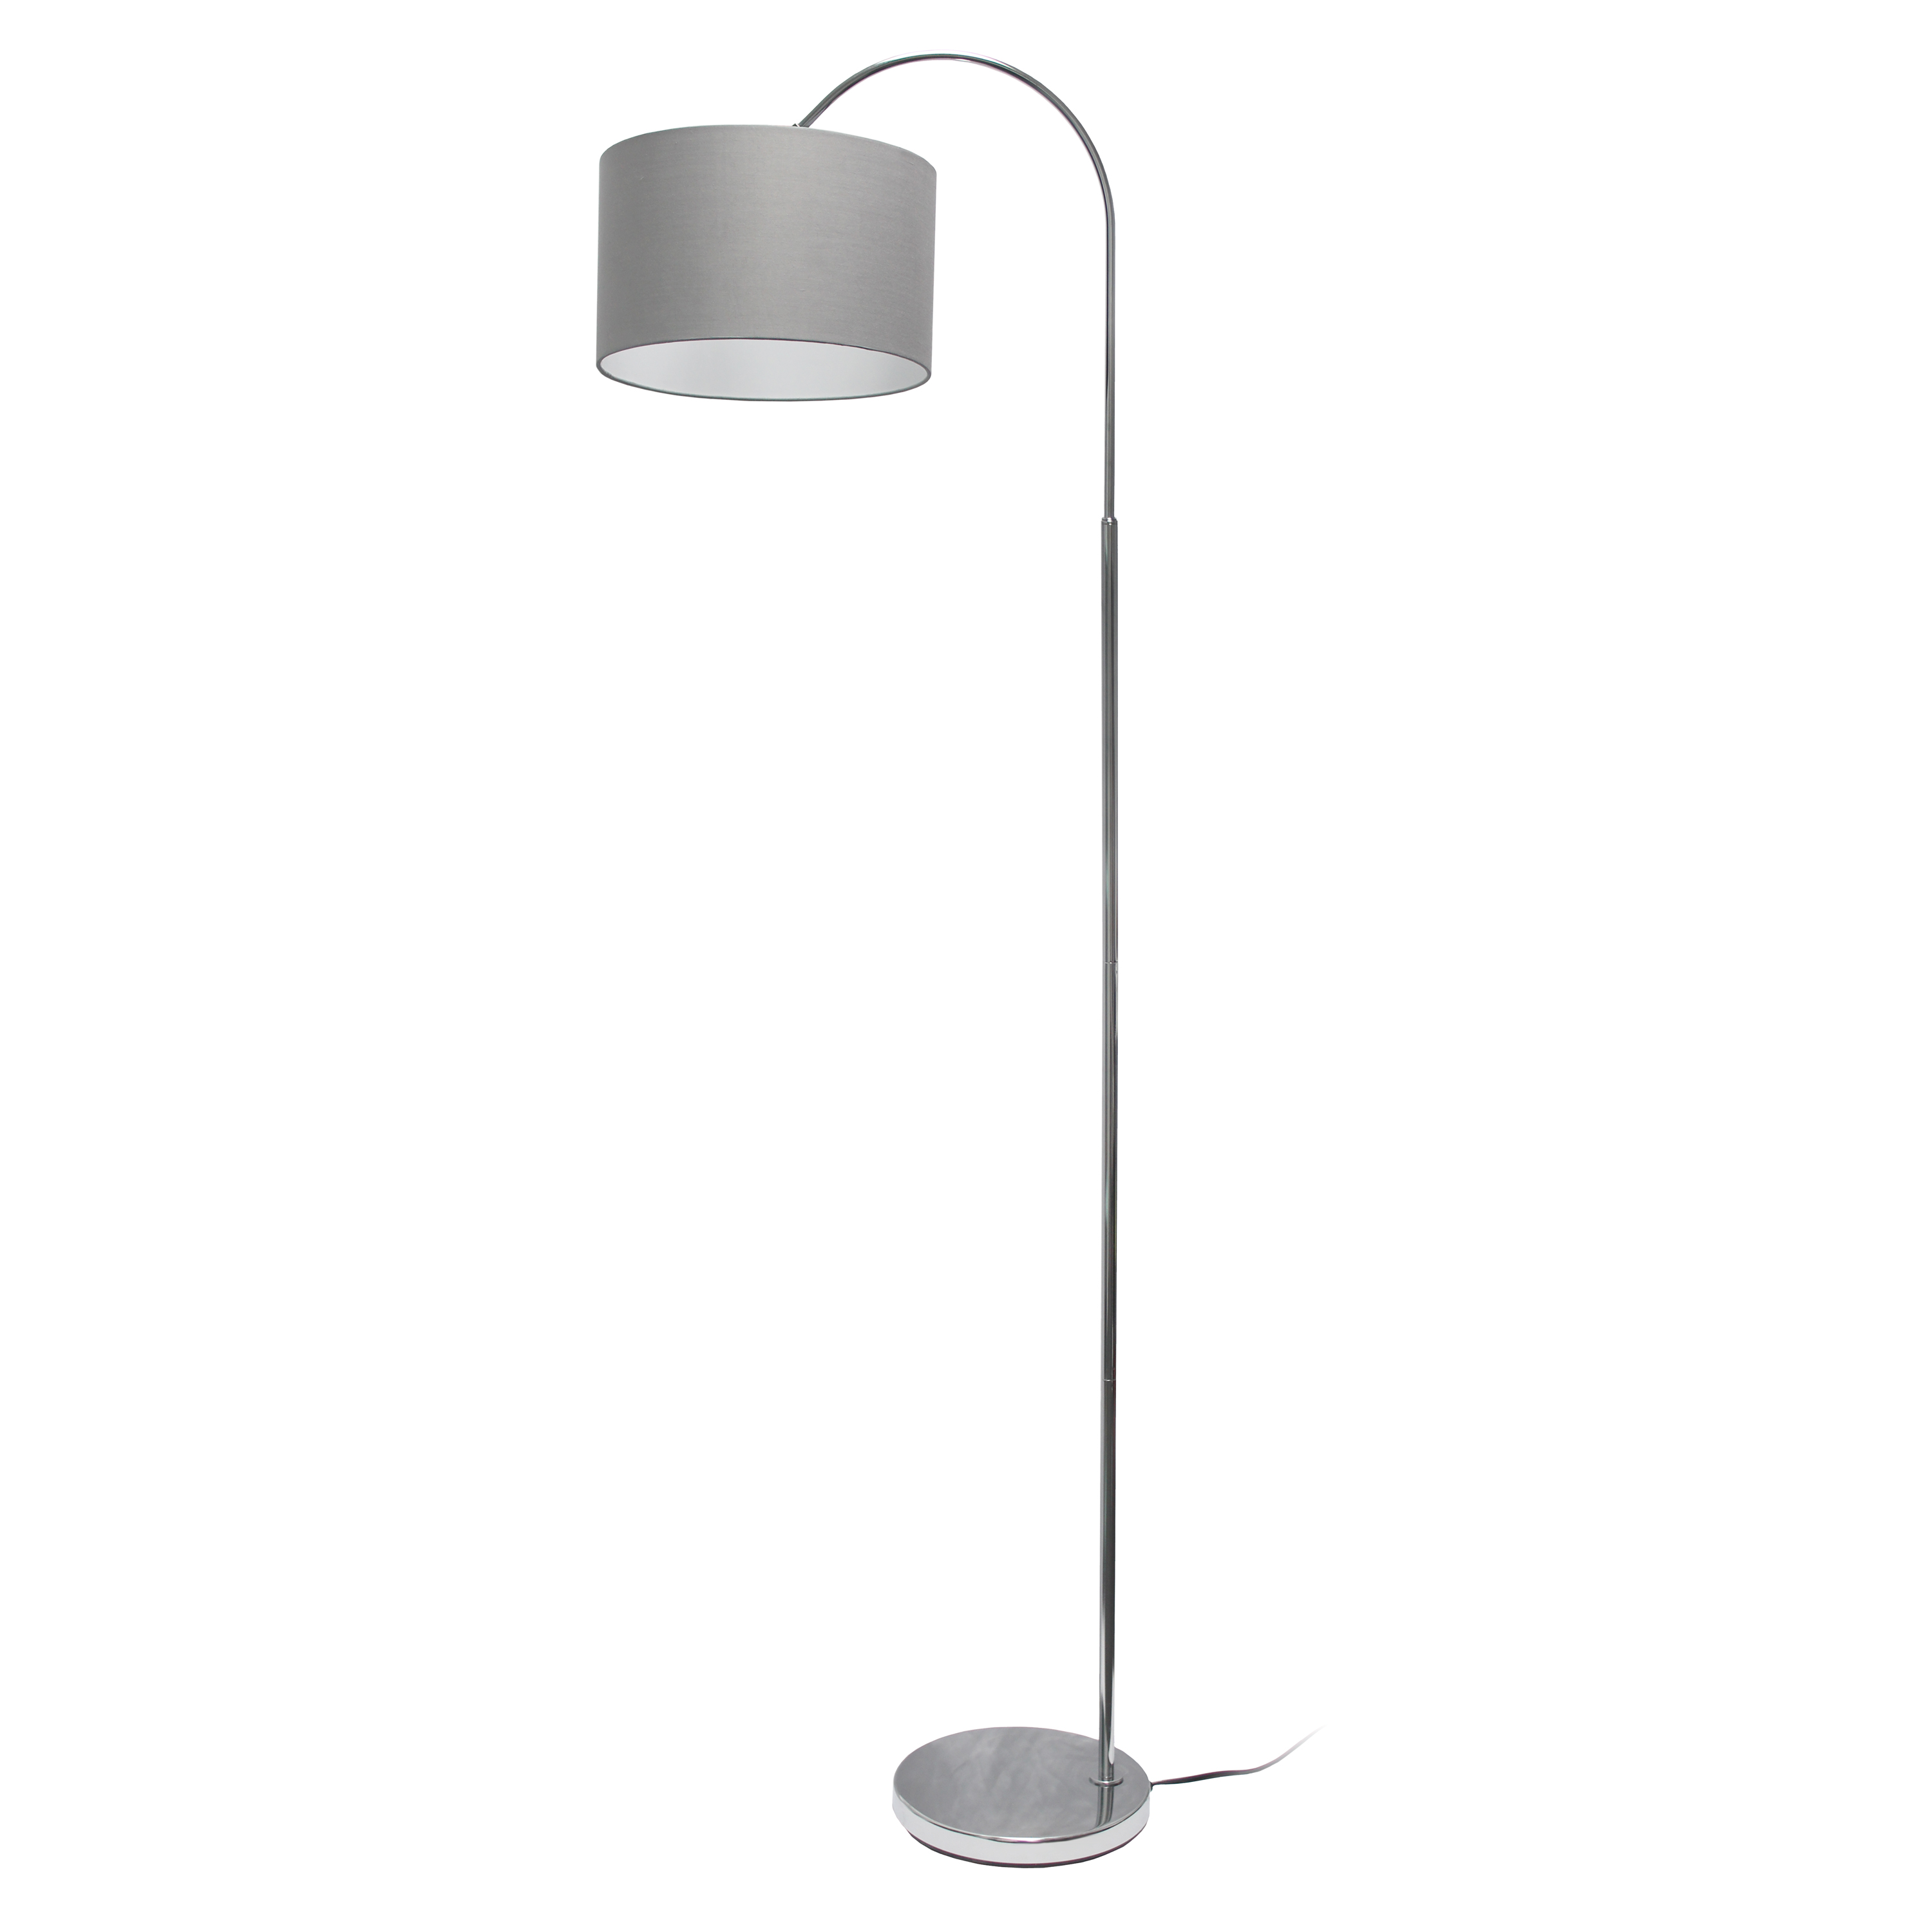 Simple Designs Arched Brushed Nickel Floor Lamp, Gray Shade 